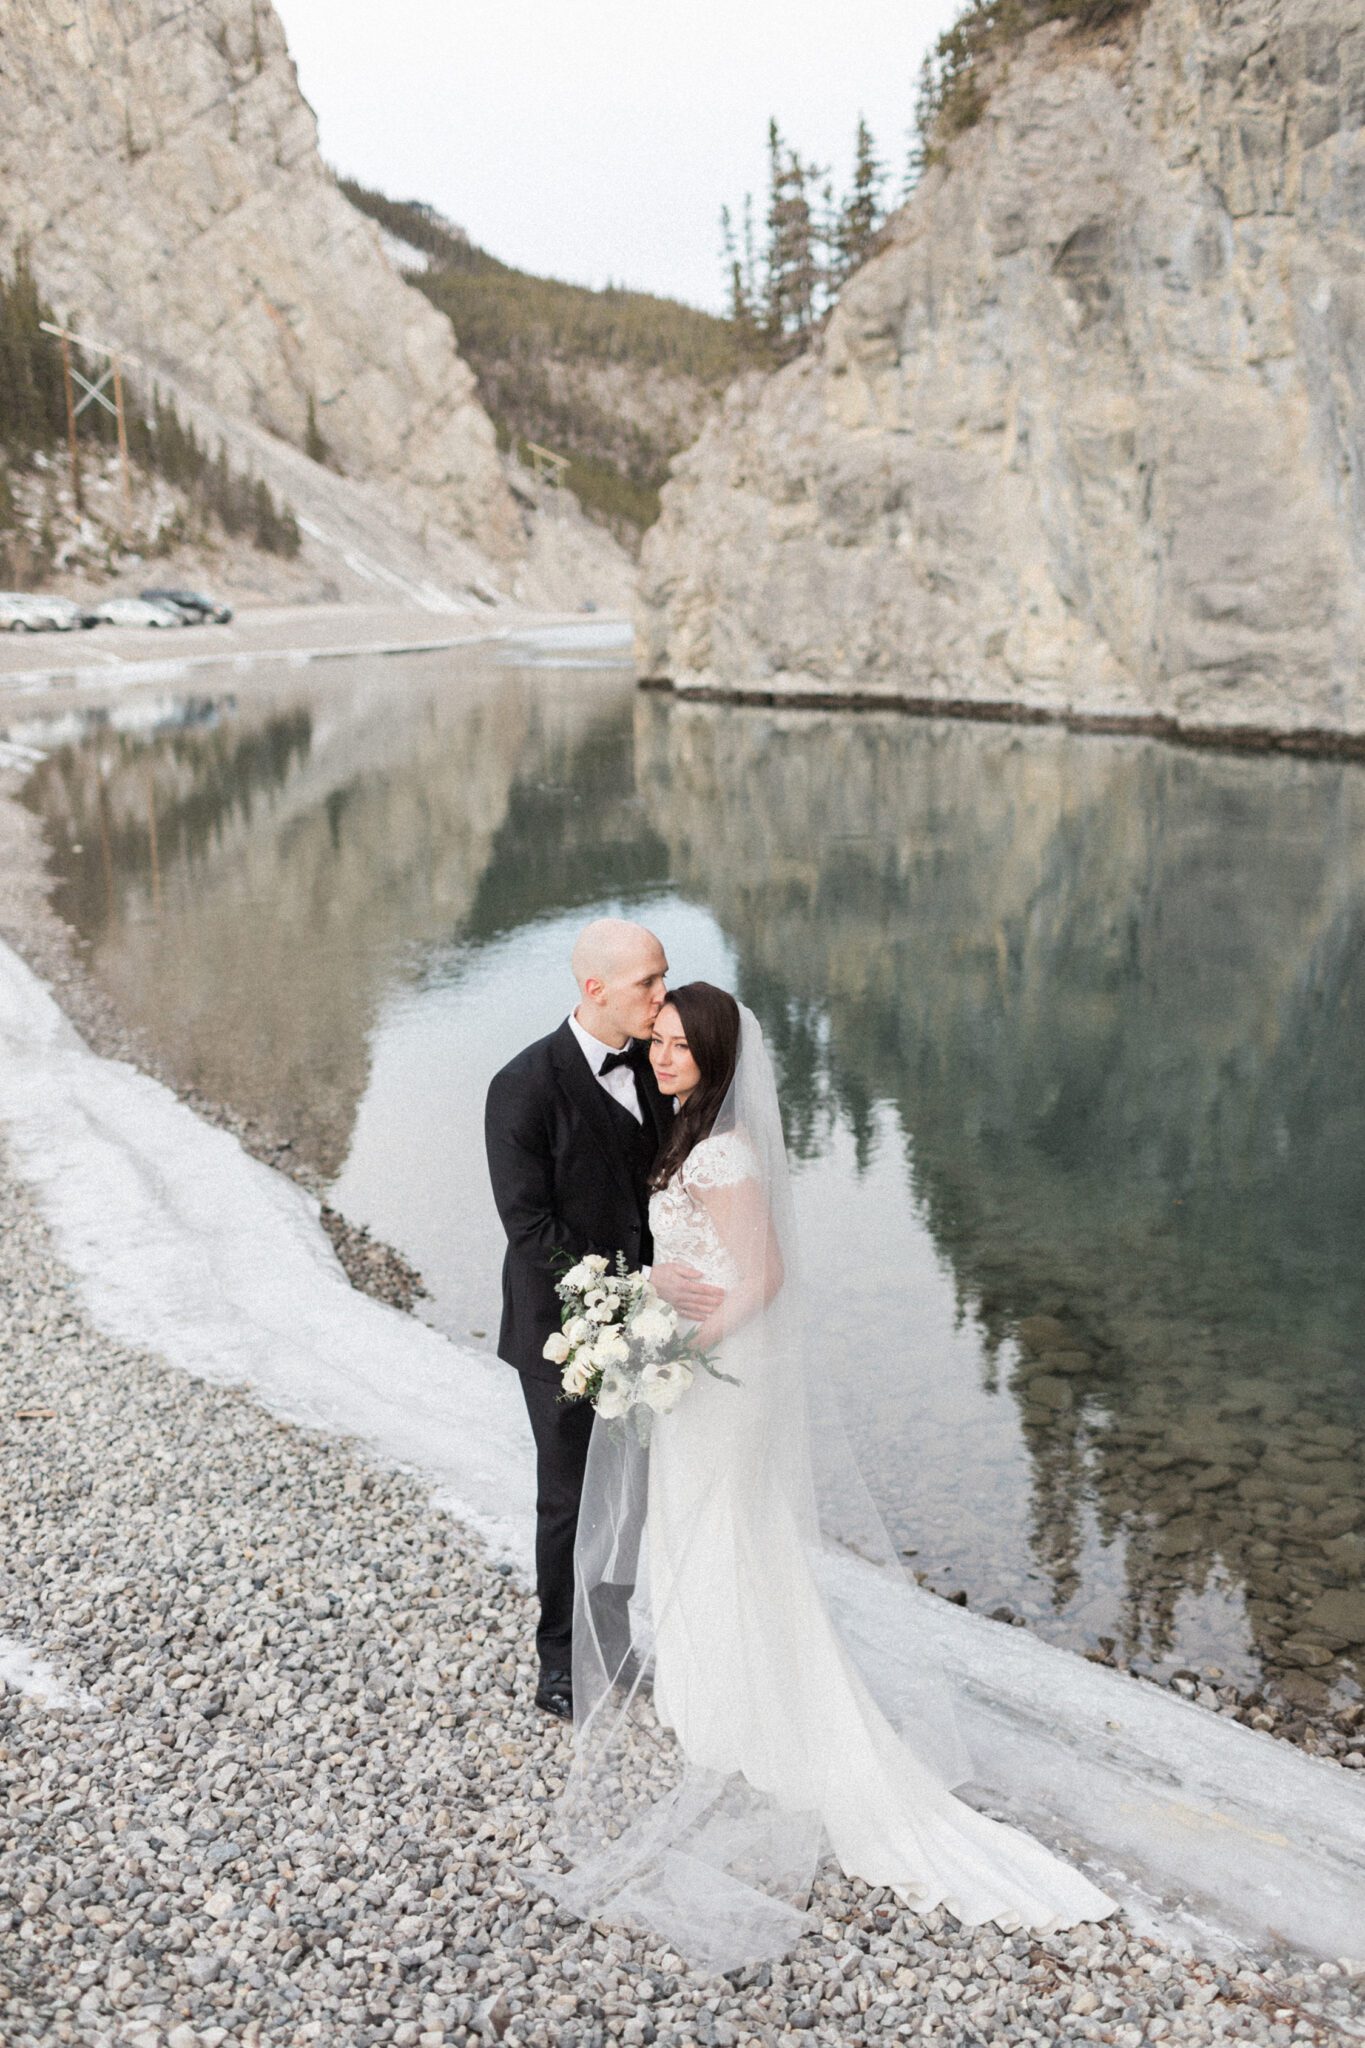 Portrait of bride and groom in front of mirror lake with a gorgeous mountain backdrop, bride holding elegant bouquet white white florals and greenery. Winter wedding inspiration. 